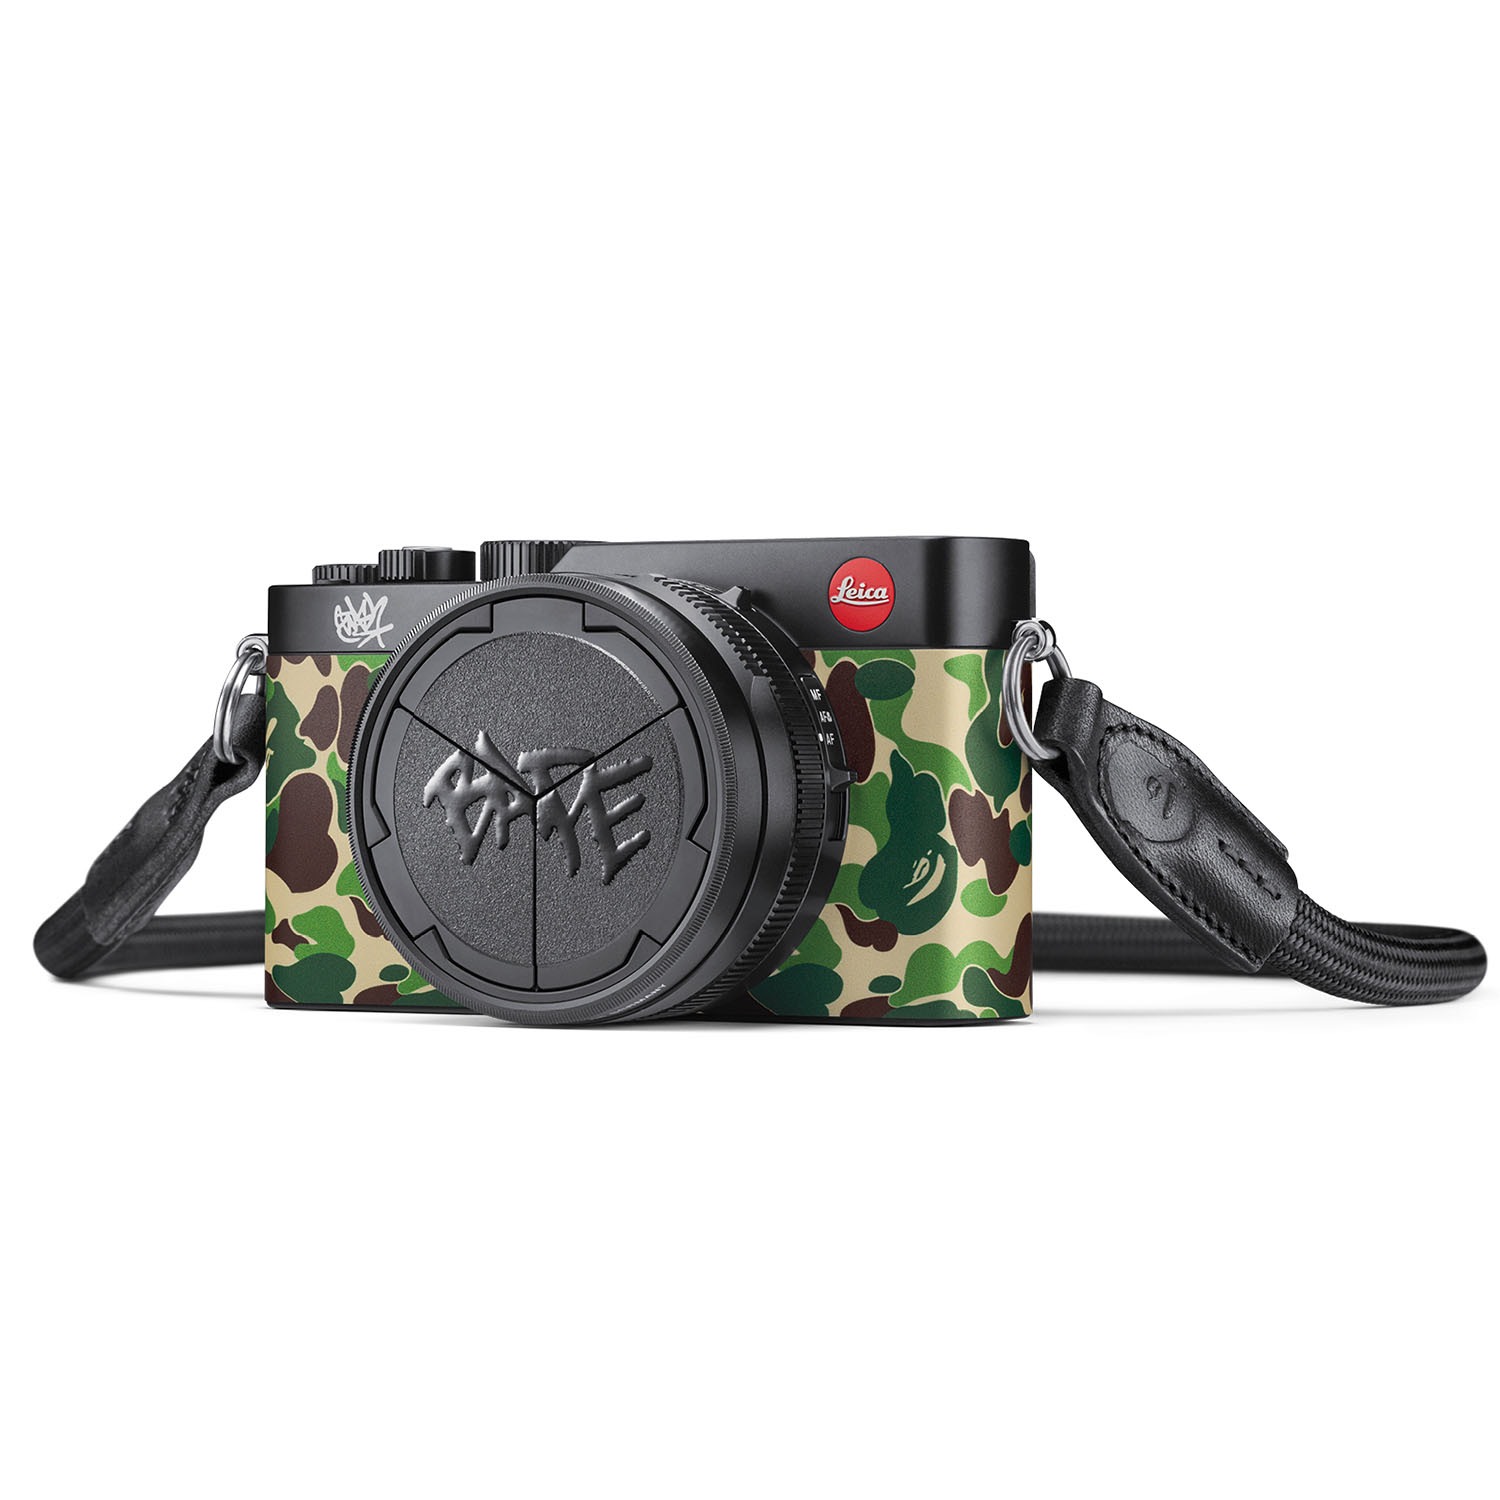 Leica D-Lux 7 "A Bathing Ape x Stash" Special Edition Main Image